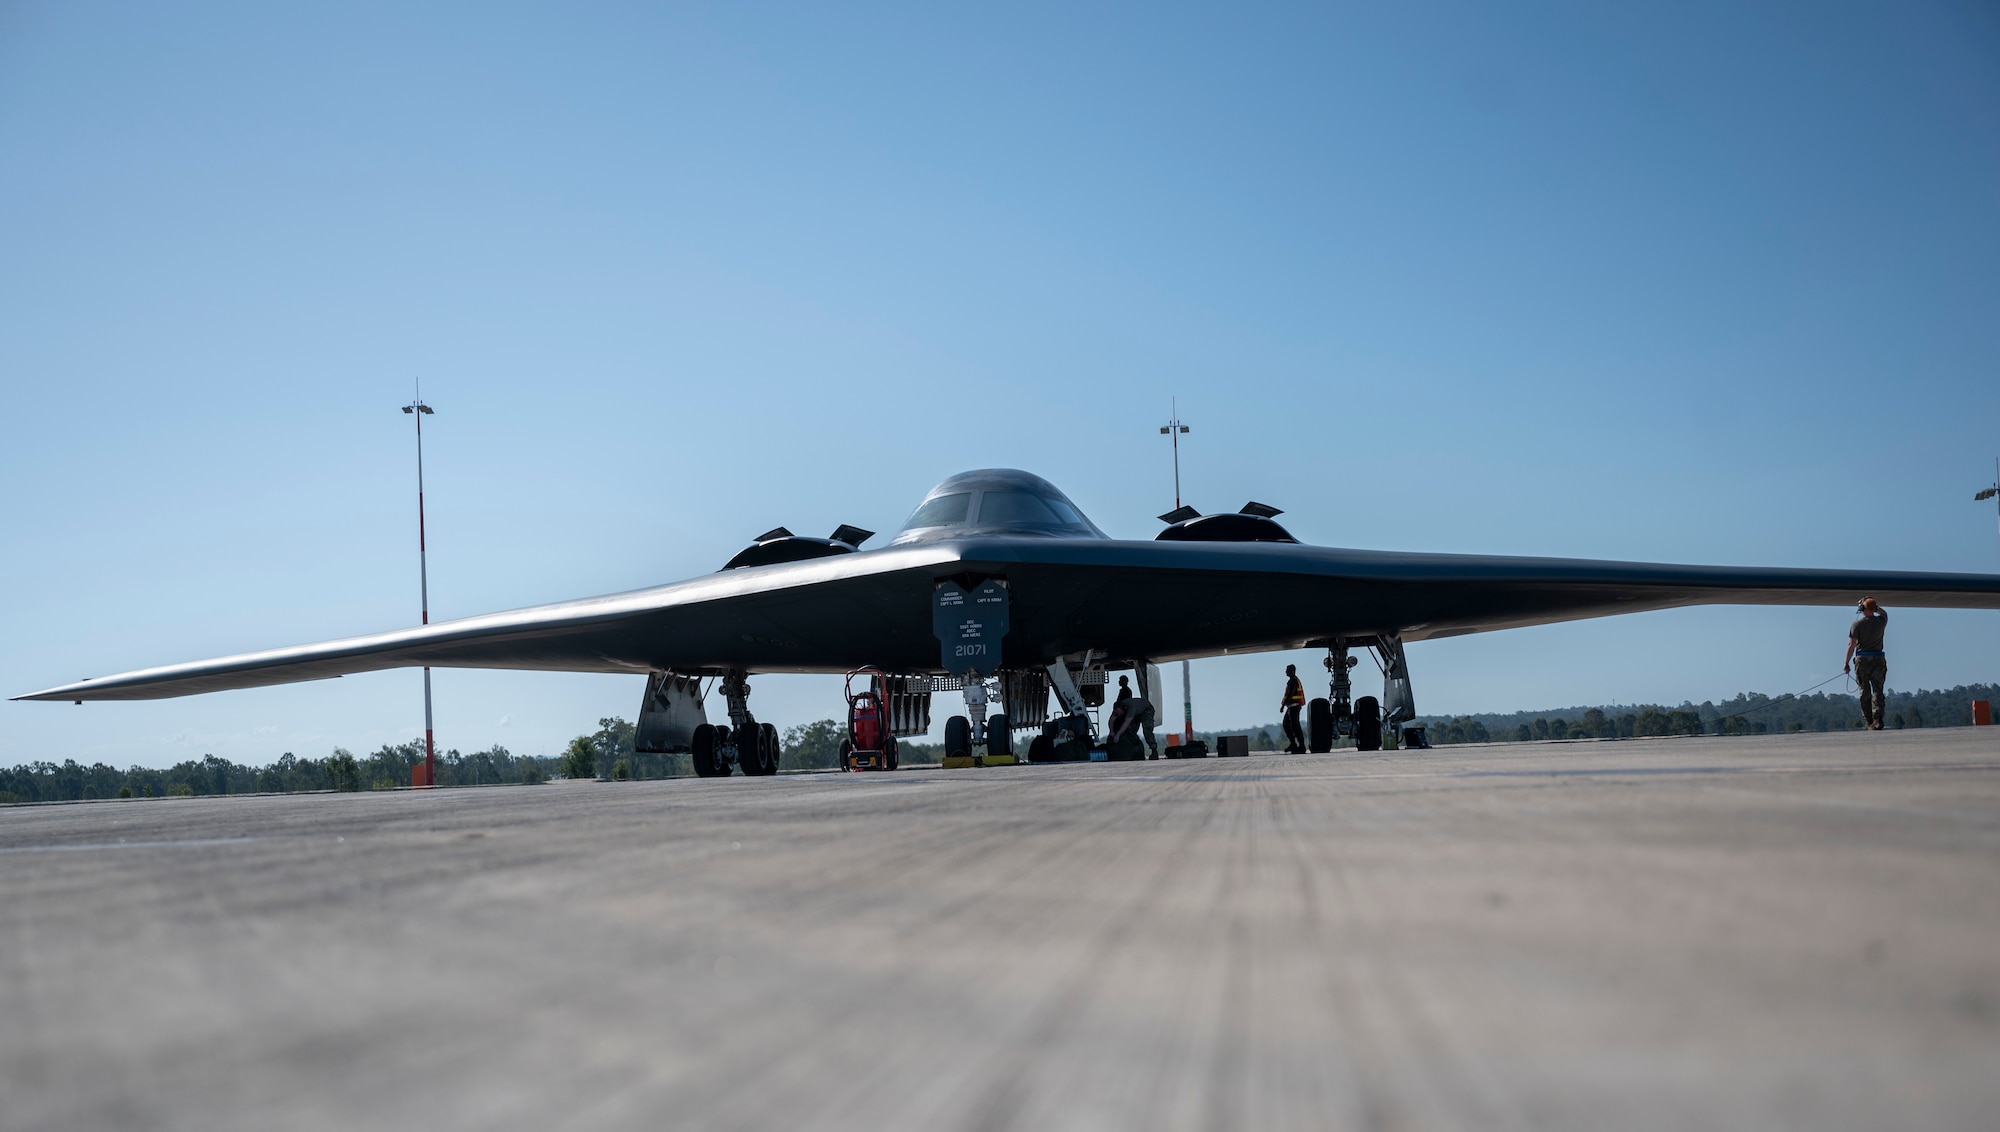 A B-2 Spirit sits at Royal Australian Air Force Base Amberley, Australia. After conducting integration with RAAF and U.S. fighters during a training mission in the Indo-Pacific region, March 23, 2022. After integrating in Australian airspace with more than eight joint and combined aircraft, the B-2 pilots landed at Amberley—for the first time—and conducted a crew swap on the ground before becoming airborne and integrating with F-22 Raptors from Joint Base Pearl Harbor-Hickam, Hawaii, and returning back to Whiteman. Exercising interoperability between the U.S. and Australia improves our great alliance and allows us to respond even faster, promoting security cooperation across the region. (U.S. Air Force photo by Tech. Sgt. Hailey Haux)